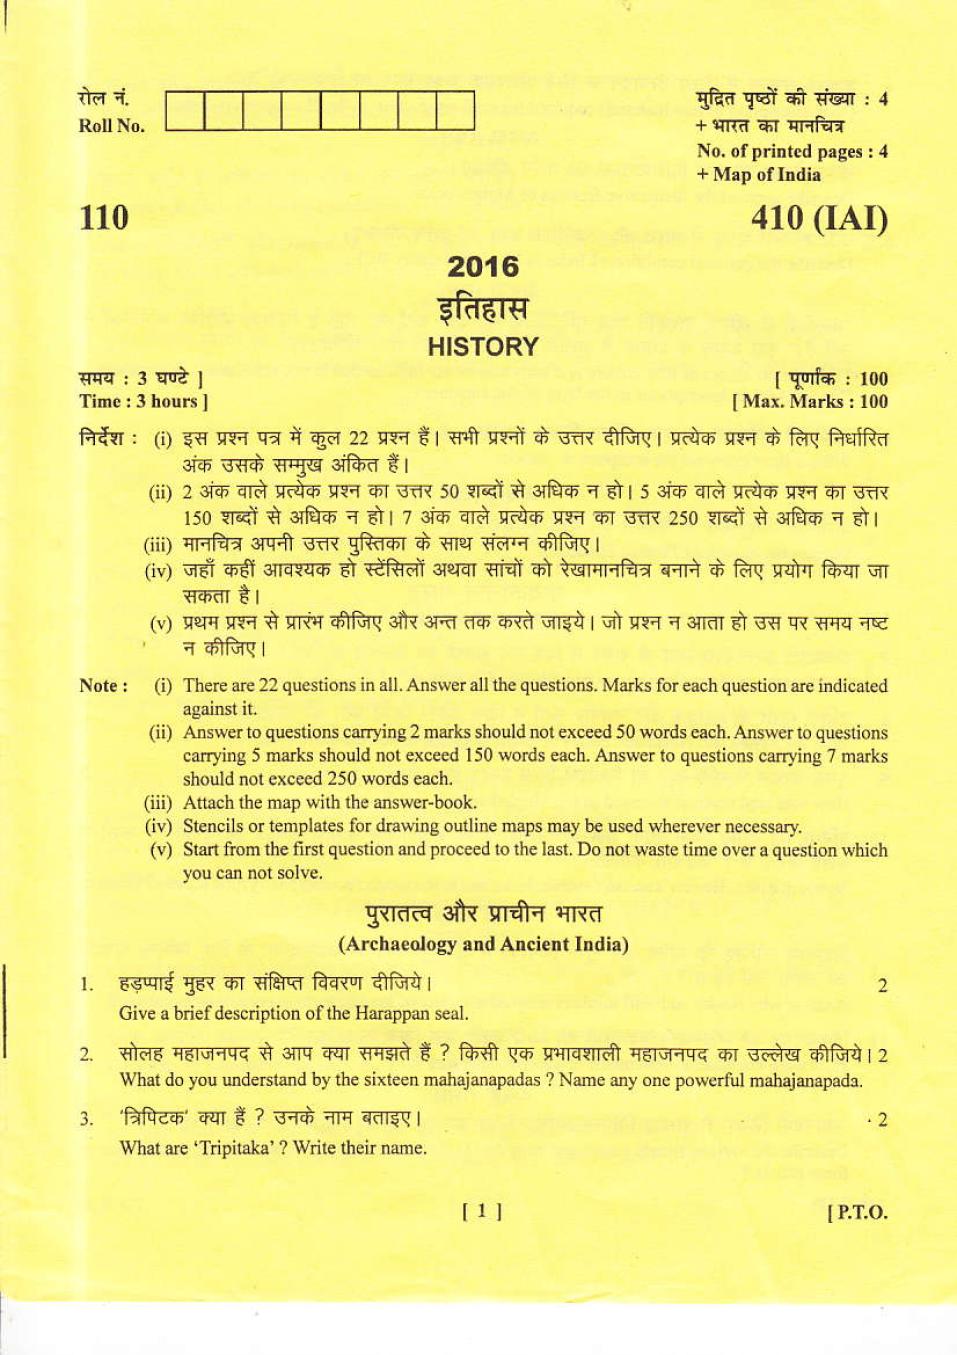 Uttarakhand Board Class 12 Question Paper 2016 for History - Page 1